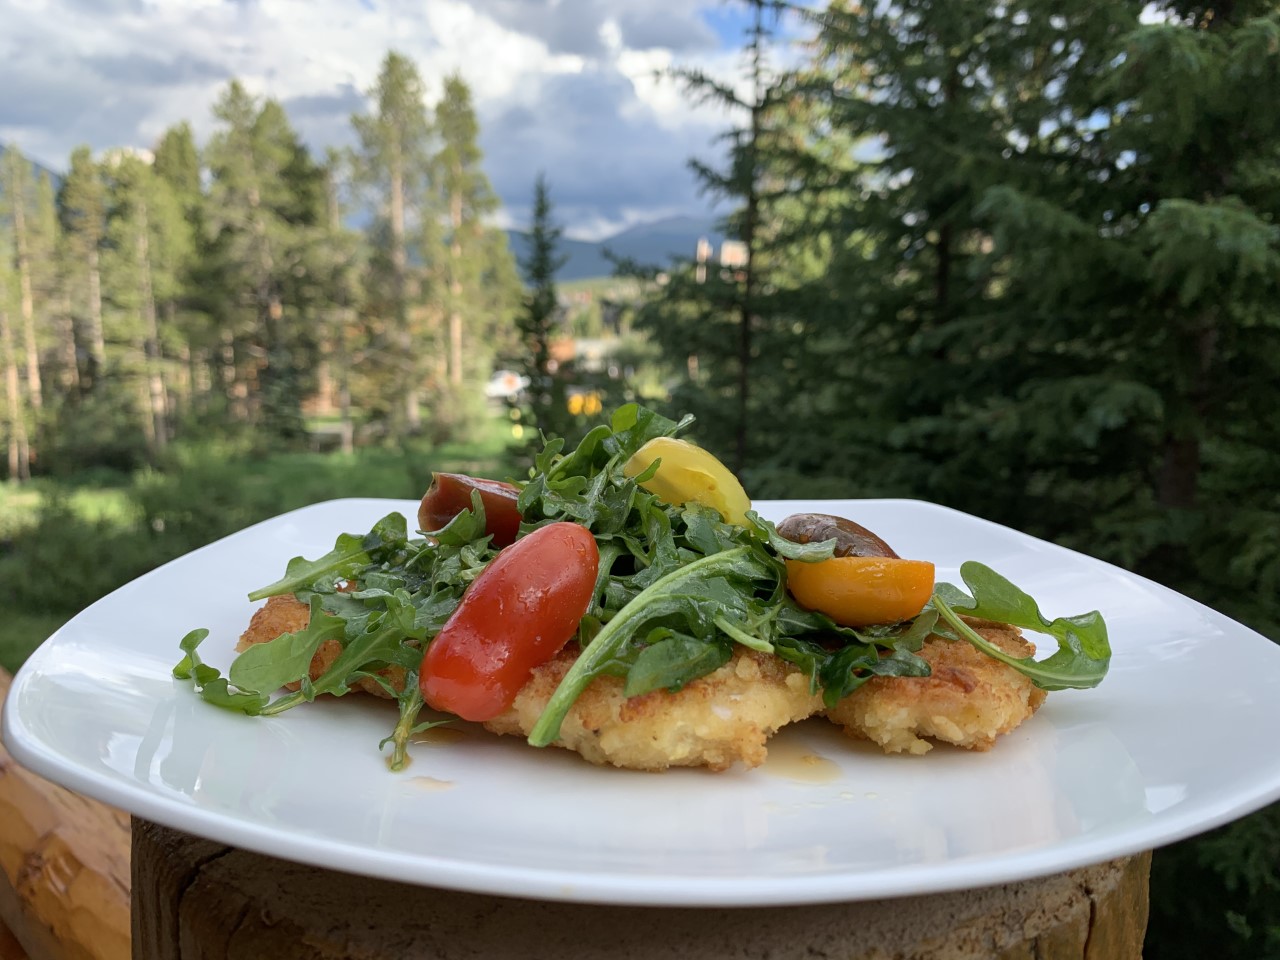 Chicken Milanese is a thinly coated chicken breast sautéed then topped with an arugula and tomato salad